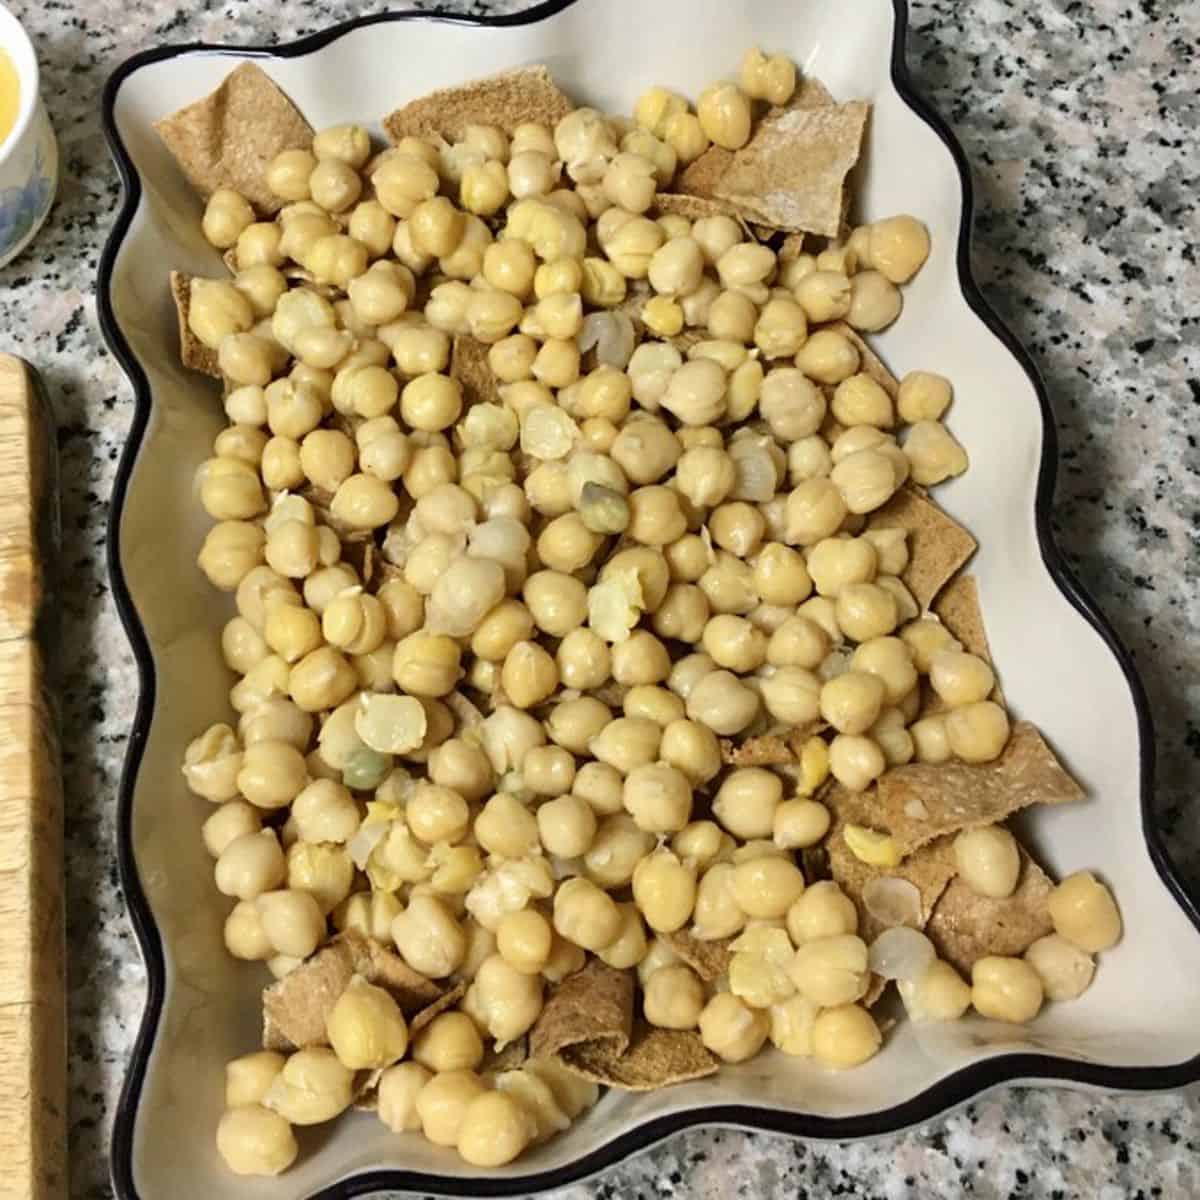 boiled chickpeas over the toasted pita 